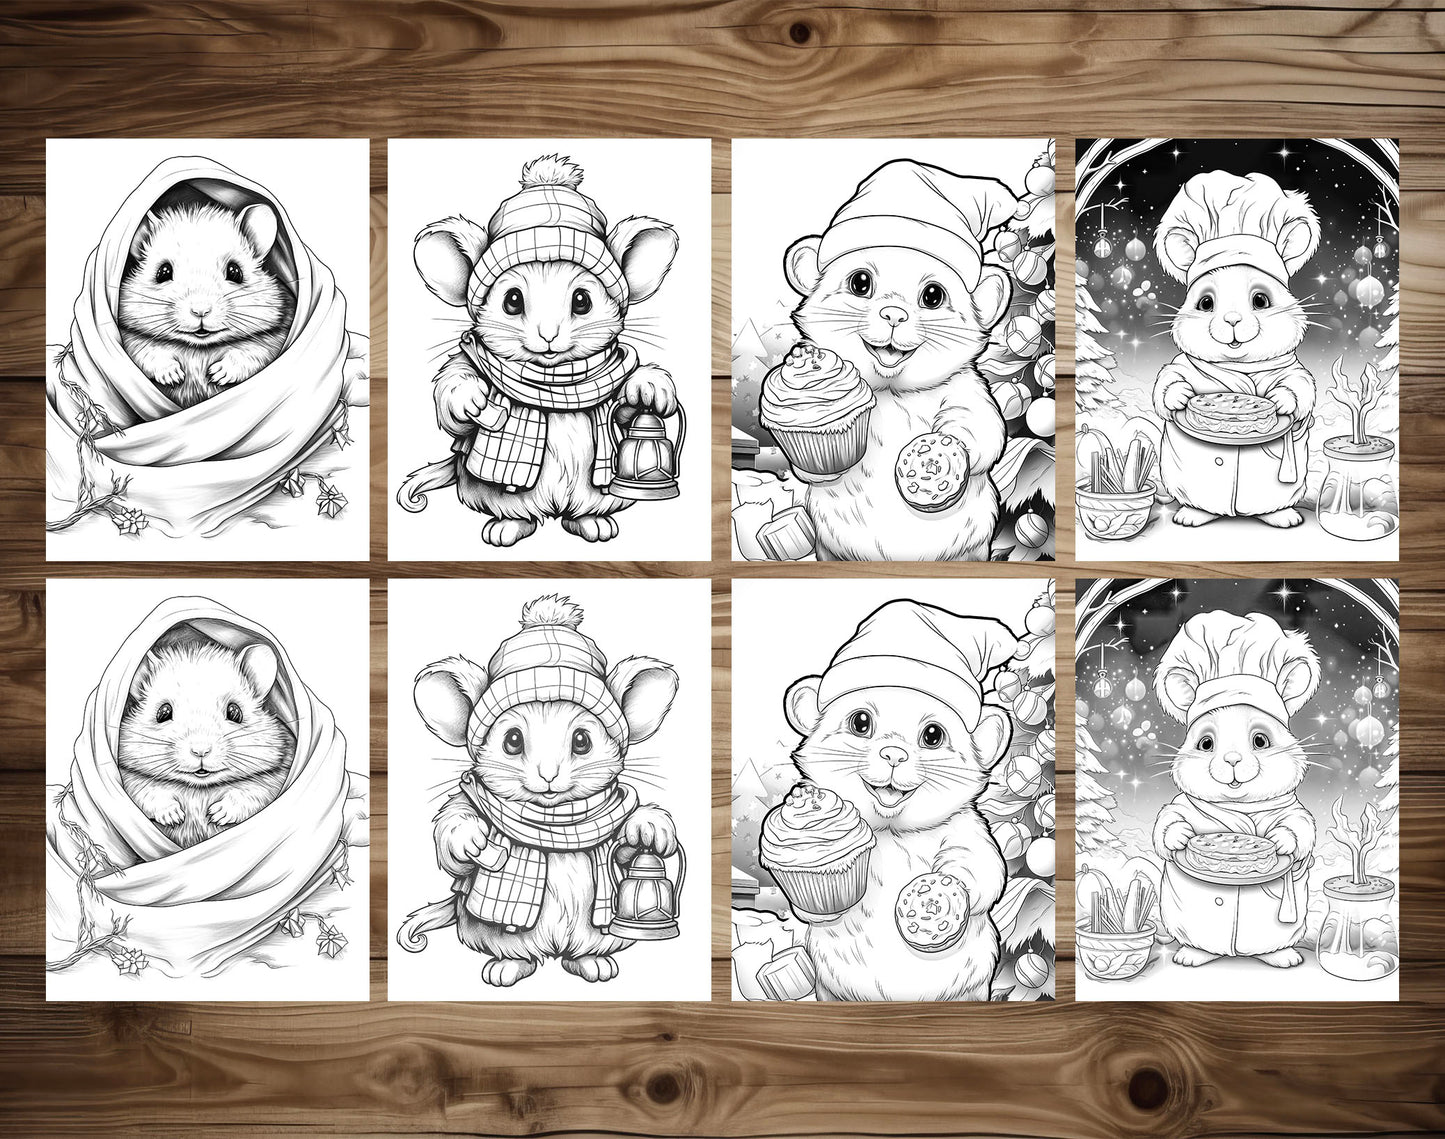 50 Hamster's Winter Grayscale Coloring Pages - Instant Download - Printable Dark/Light